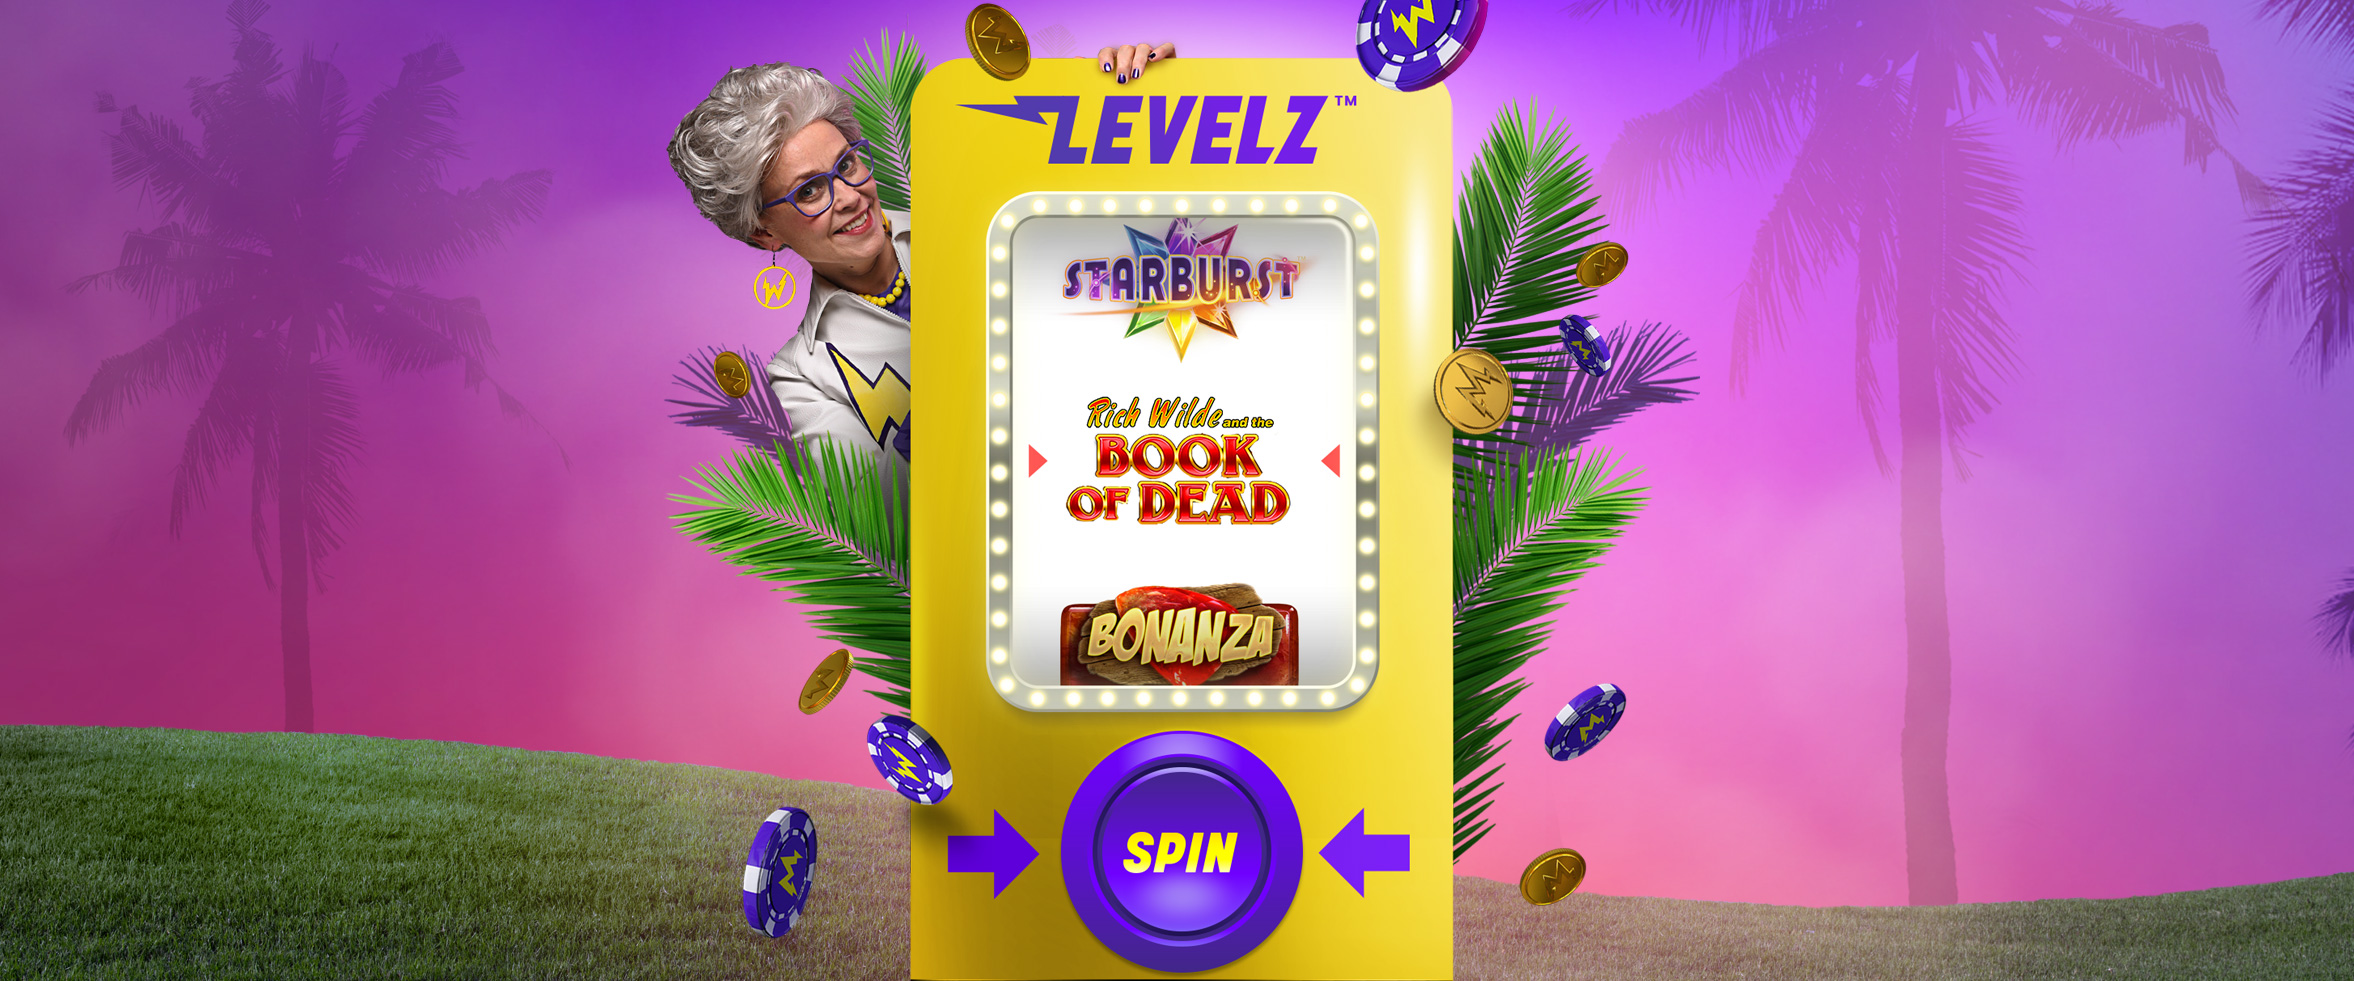 Wildz gives out 1 million free spins